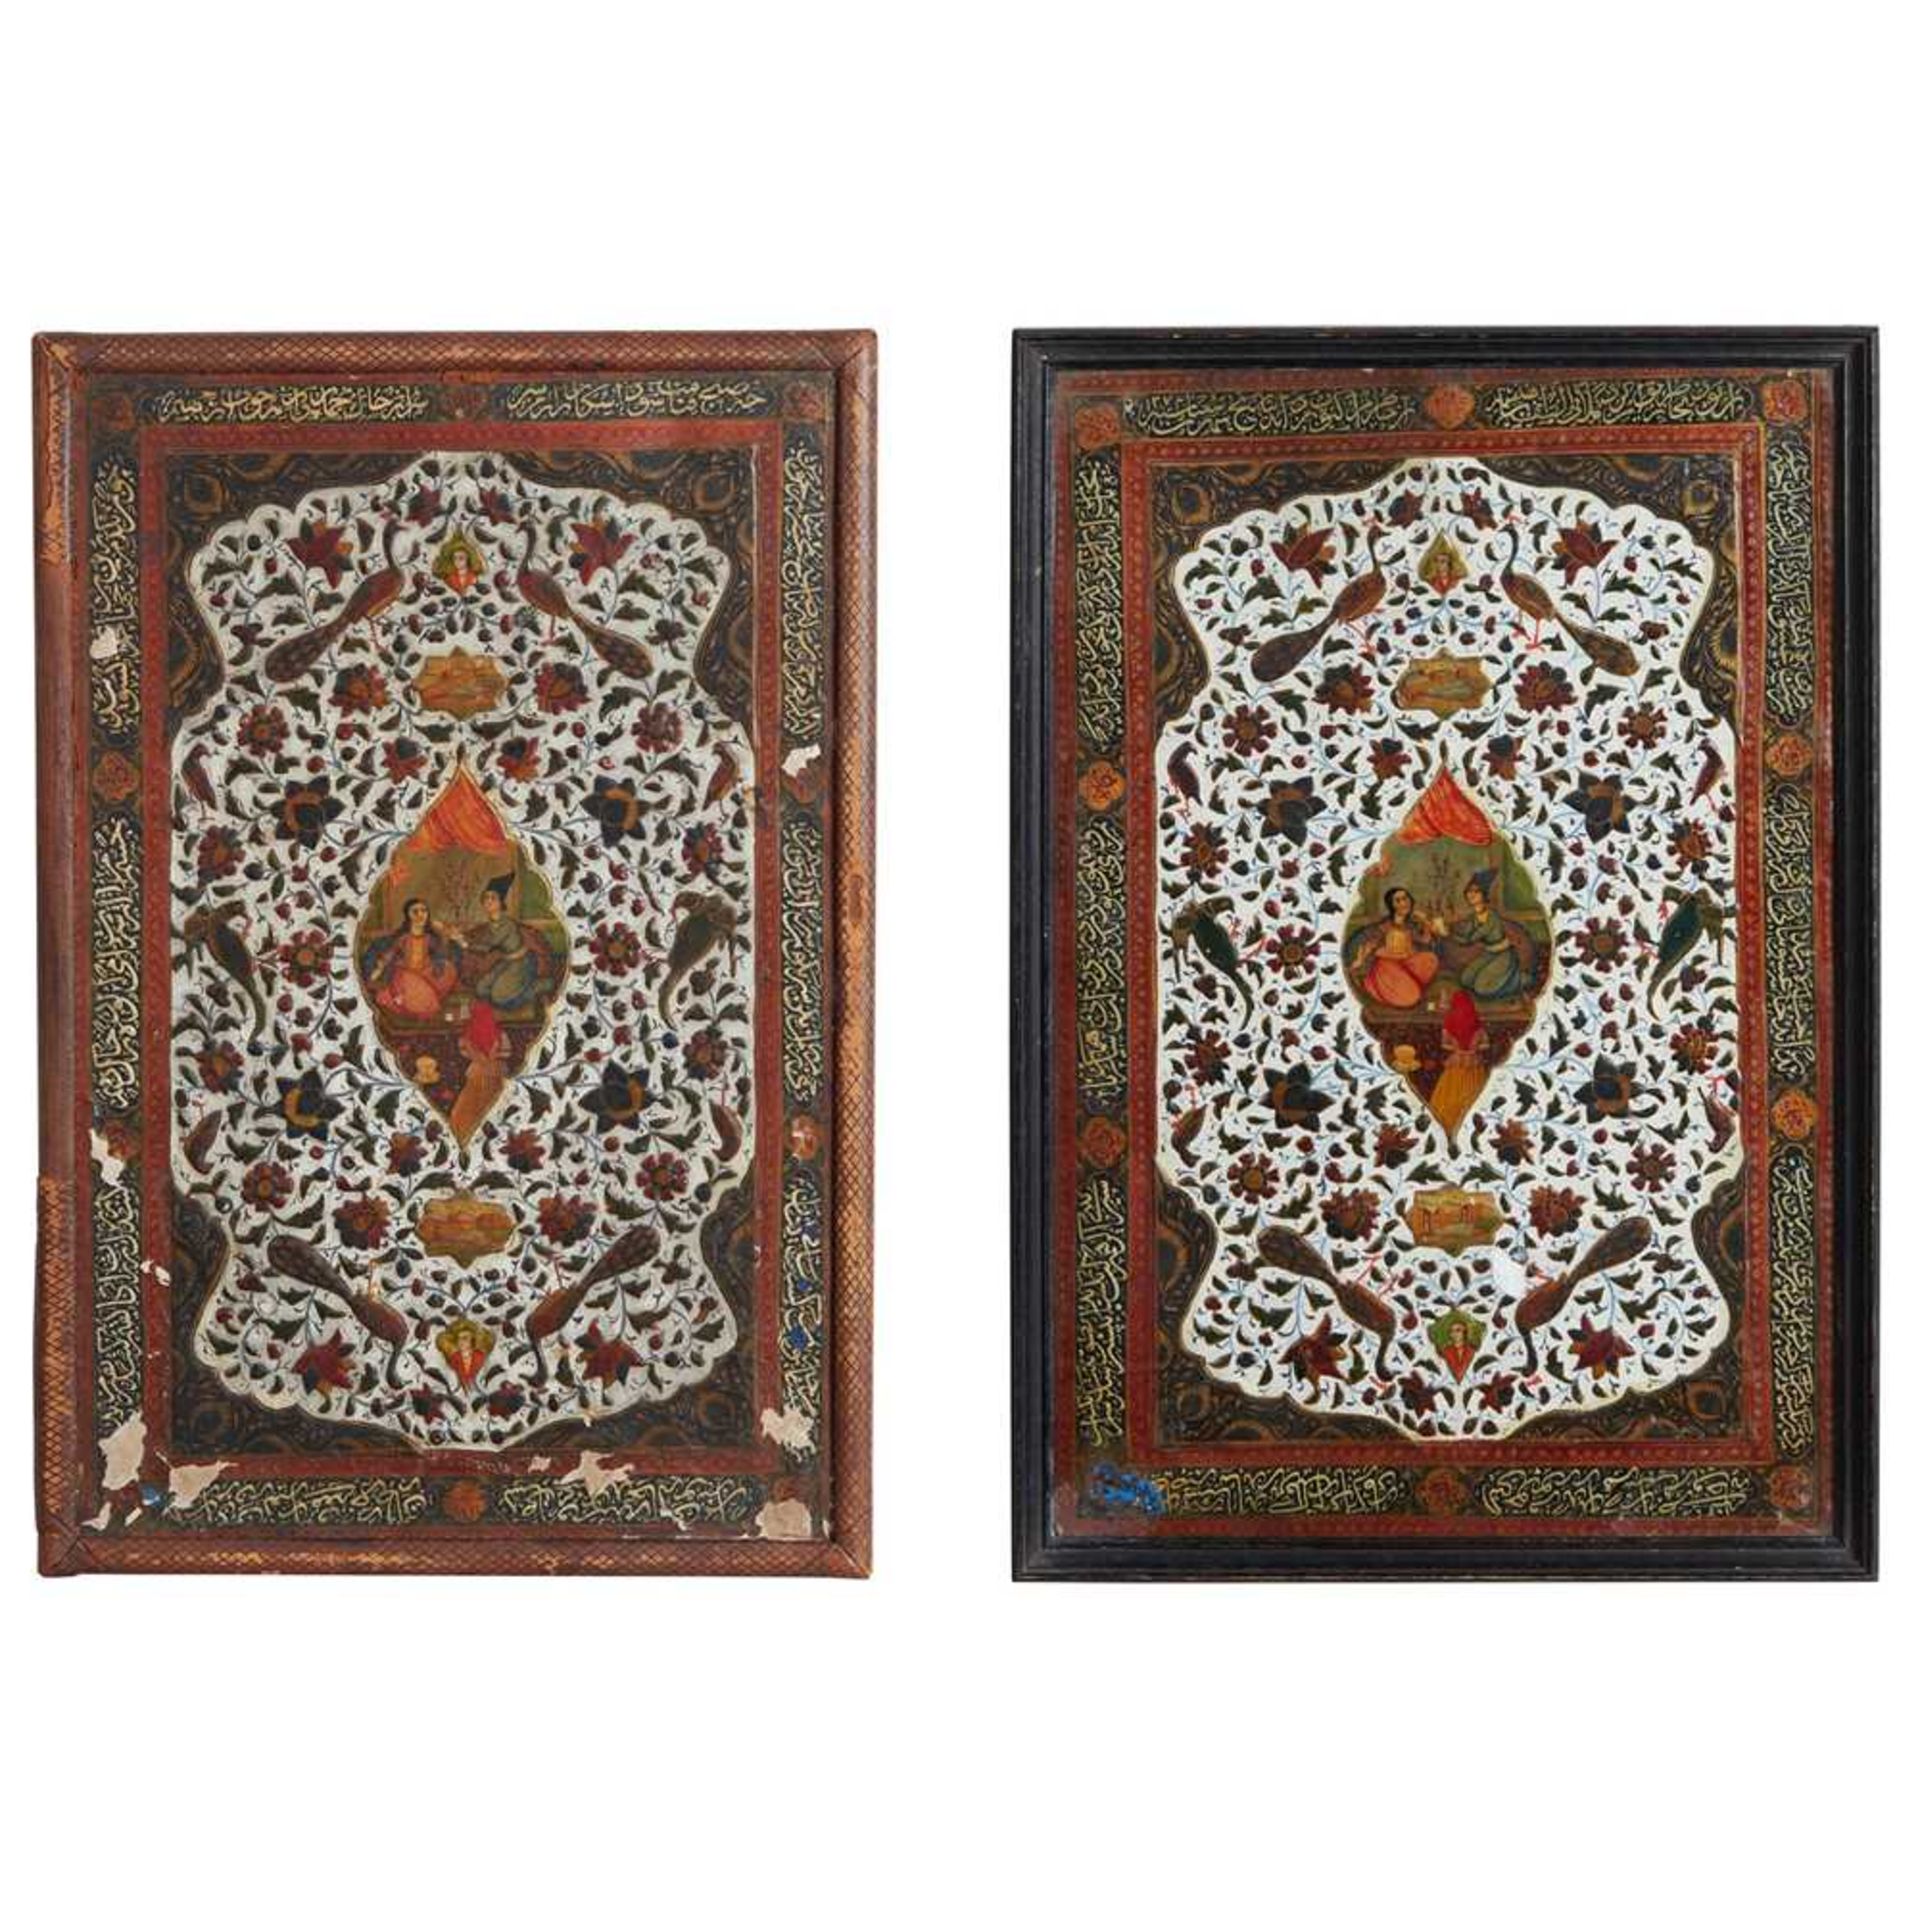 PERSIAN QAJAR LEATHER AND LACQUERED PAPIER MÂCHÉ BOOK COVERS 19TH CENTURY